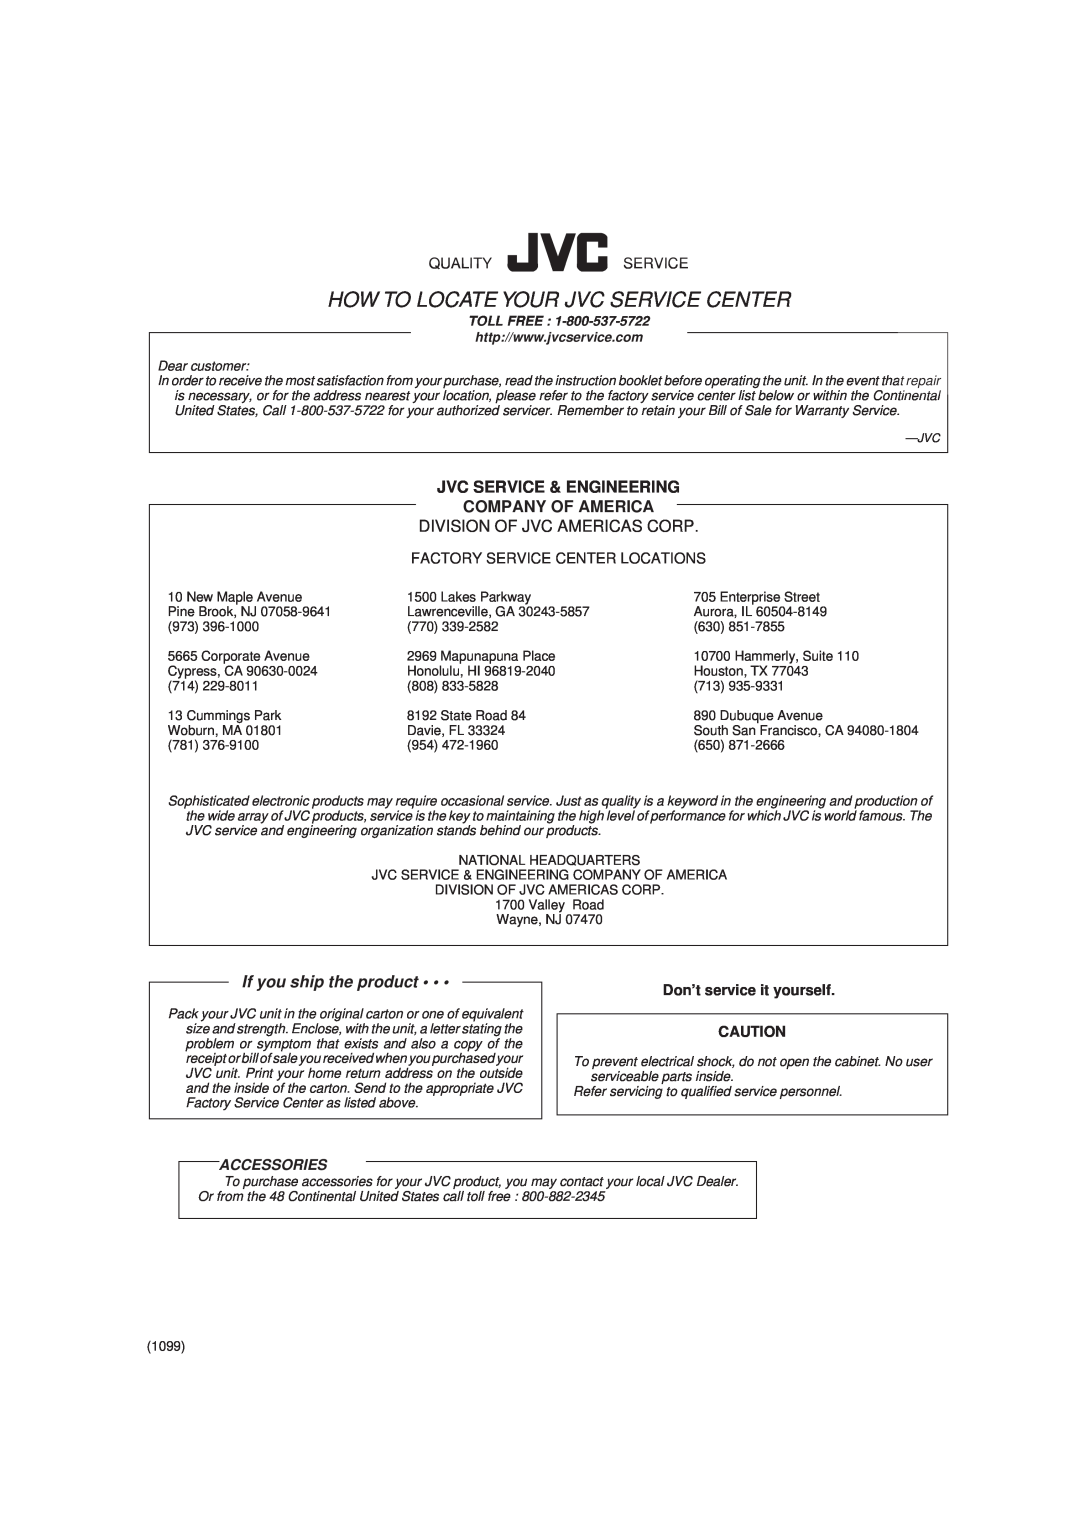 JVC MX-J900 manual Jvc Service & Engineering Company Of America, Division Of Jvc Americas Corp, Qualityservice, Accessories 